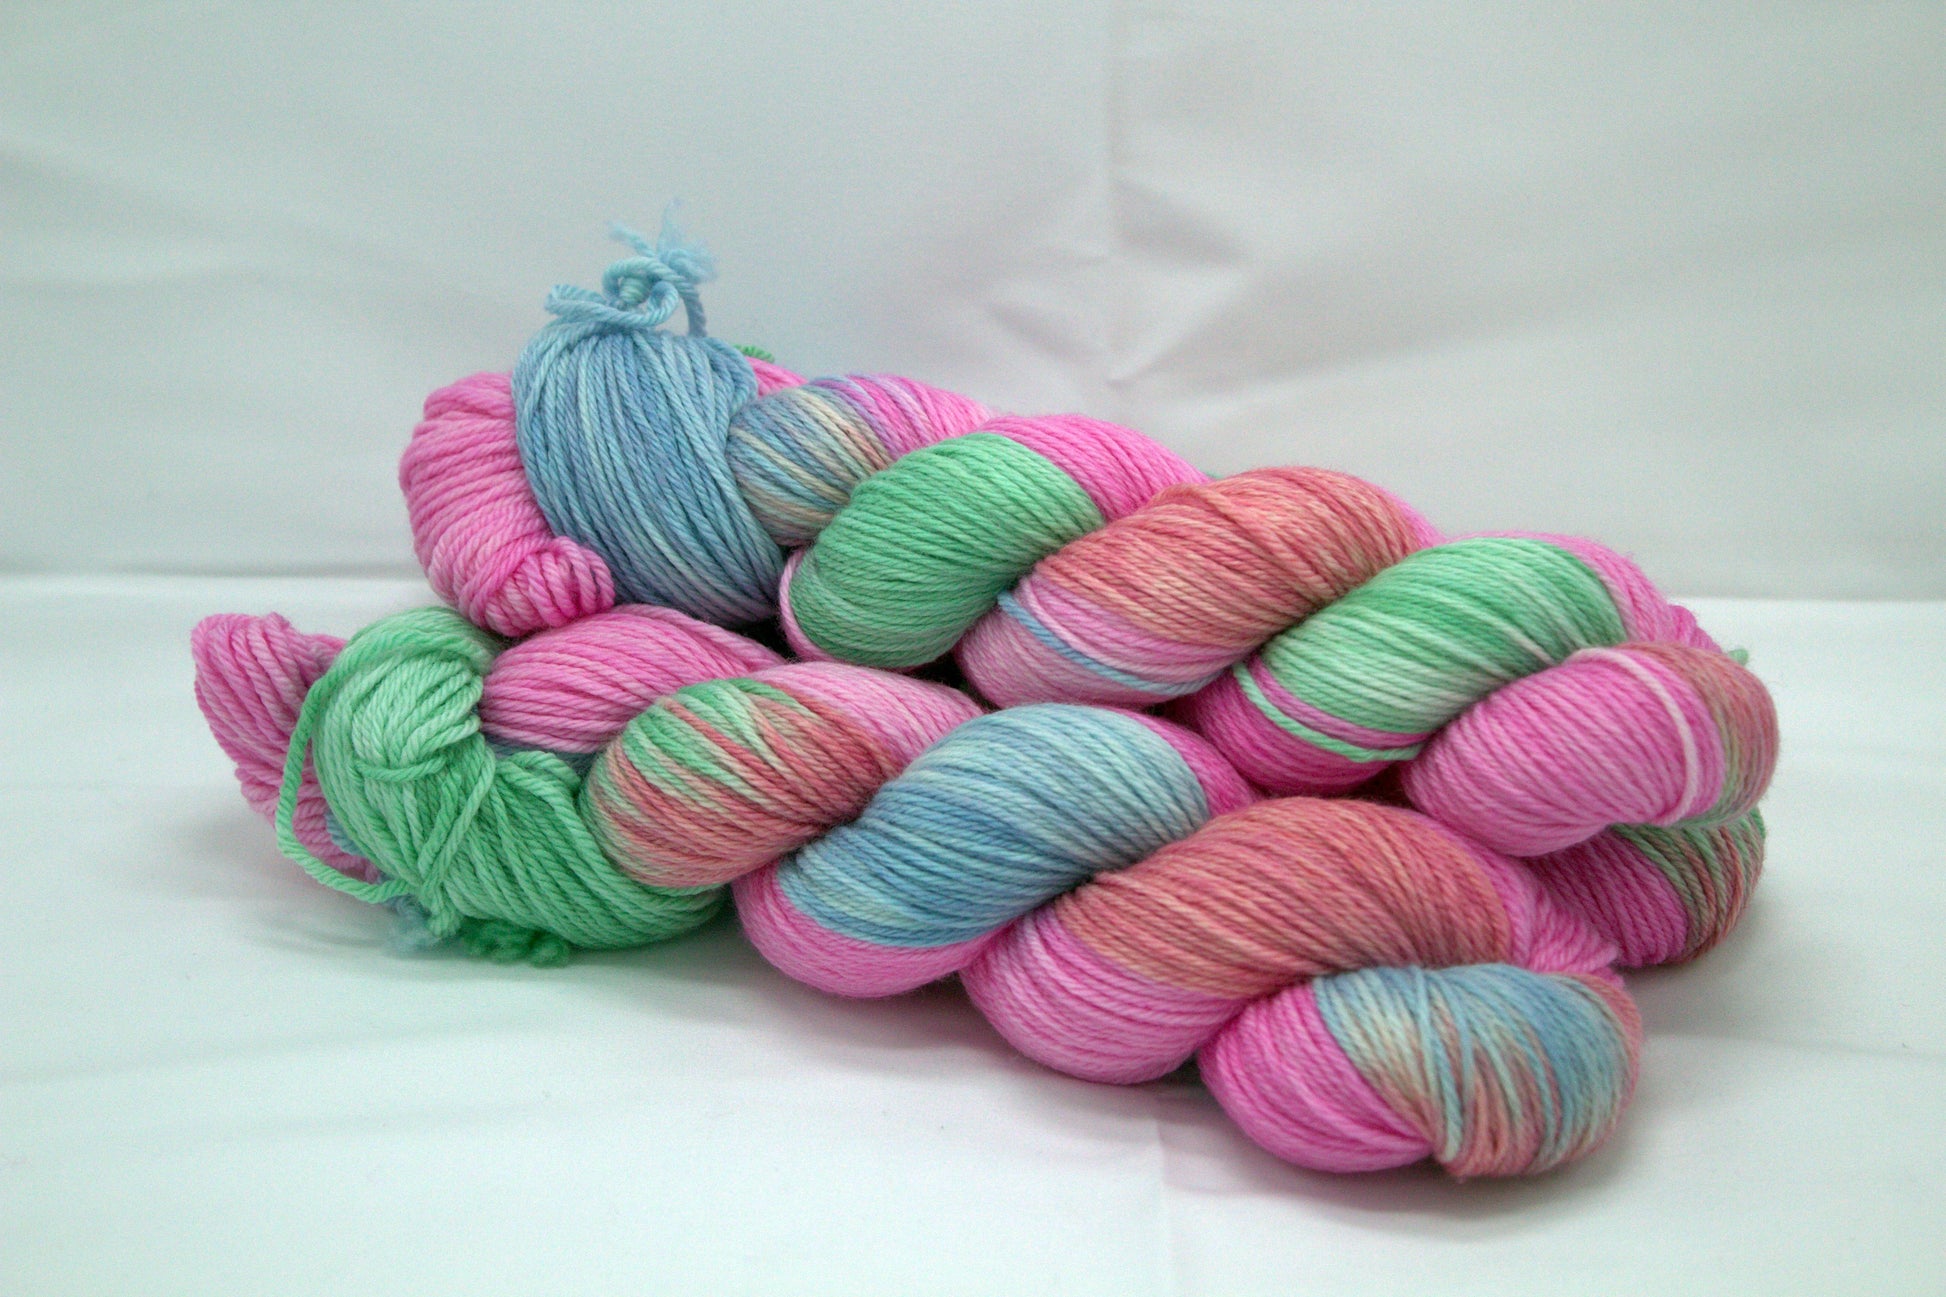 side view of three twisted skeins variegated pinks, blue and green yarn on white background.